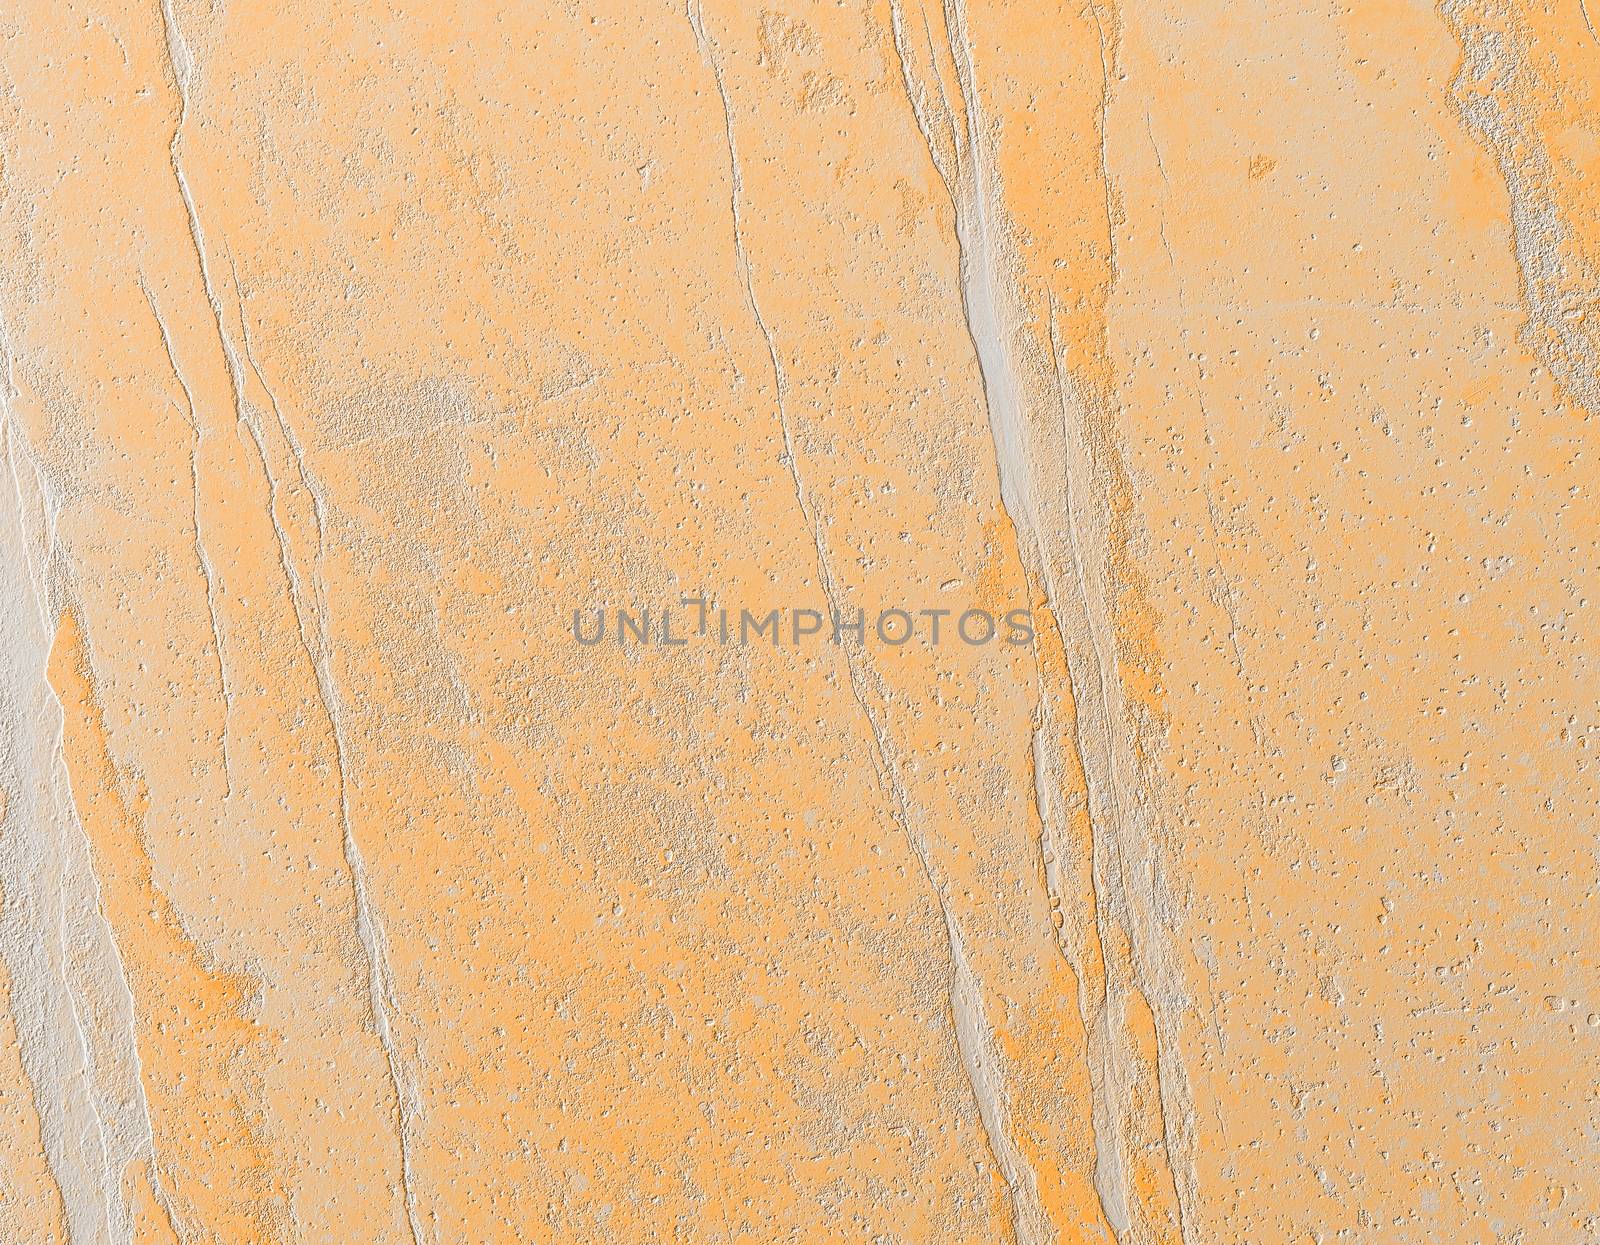 Grungy stone texture background. Abstract yellow background.